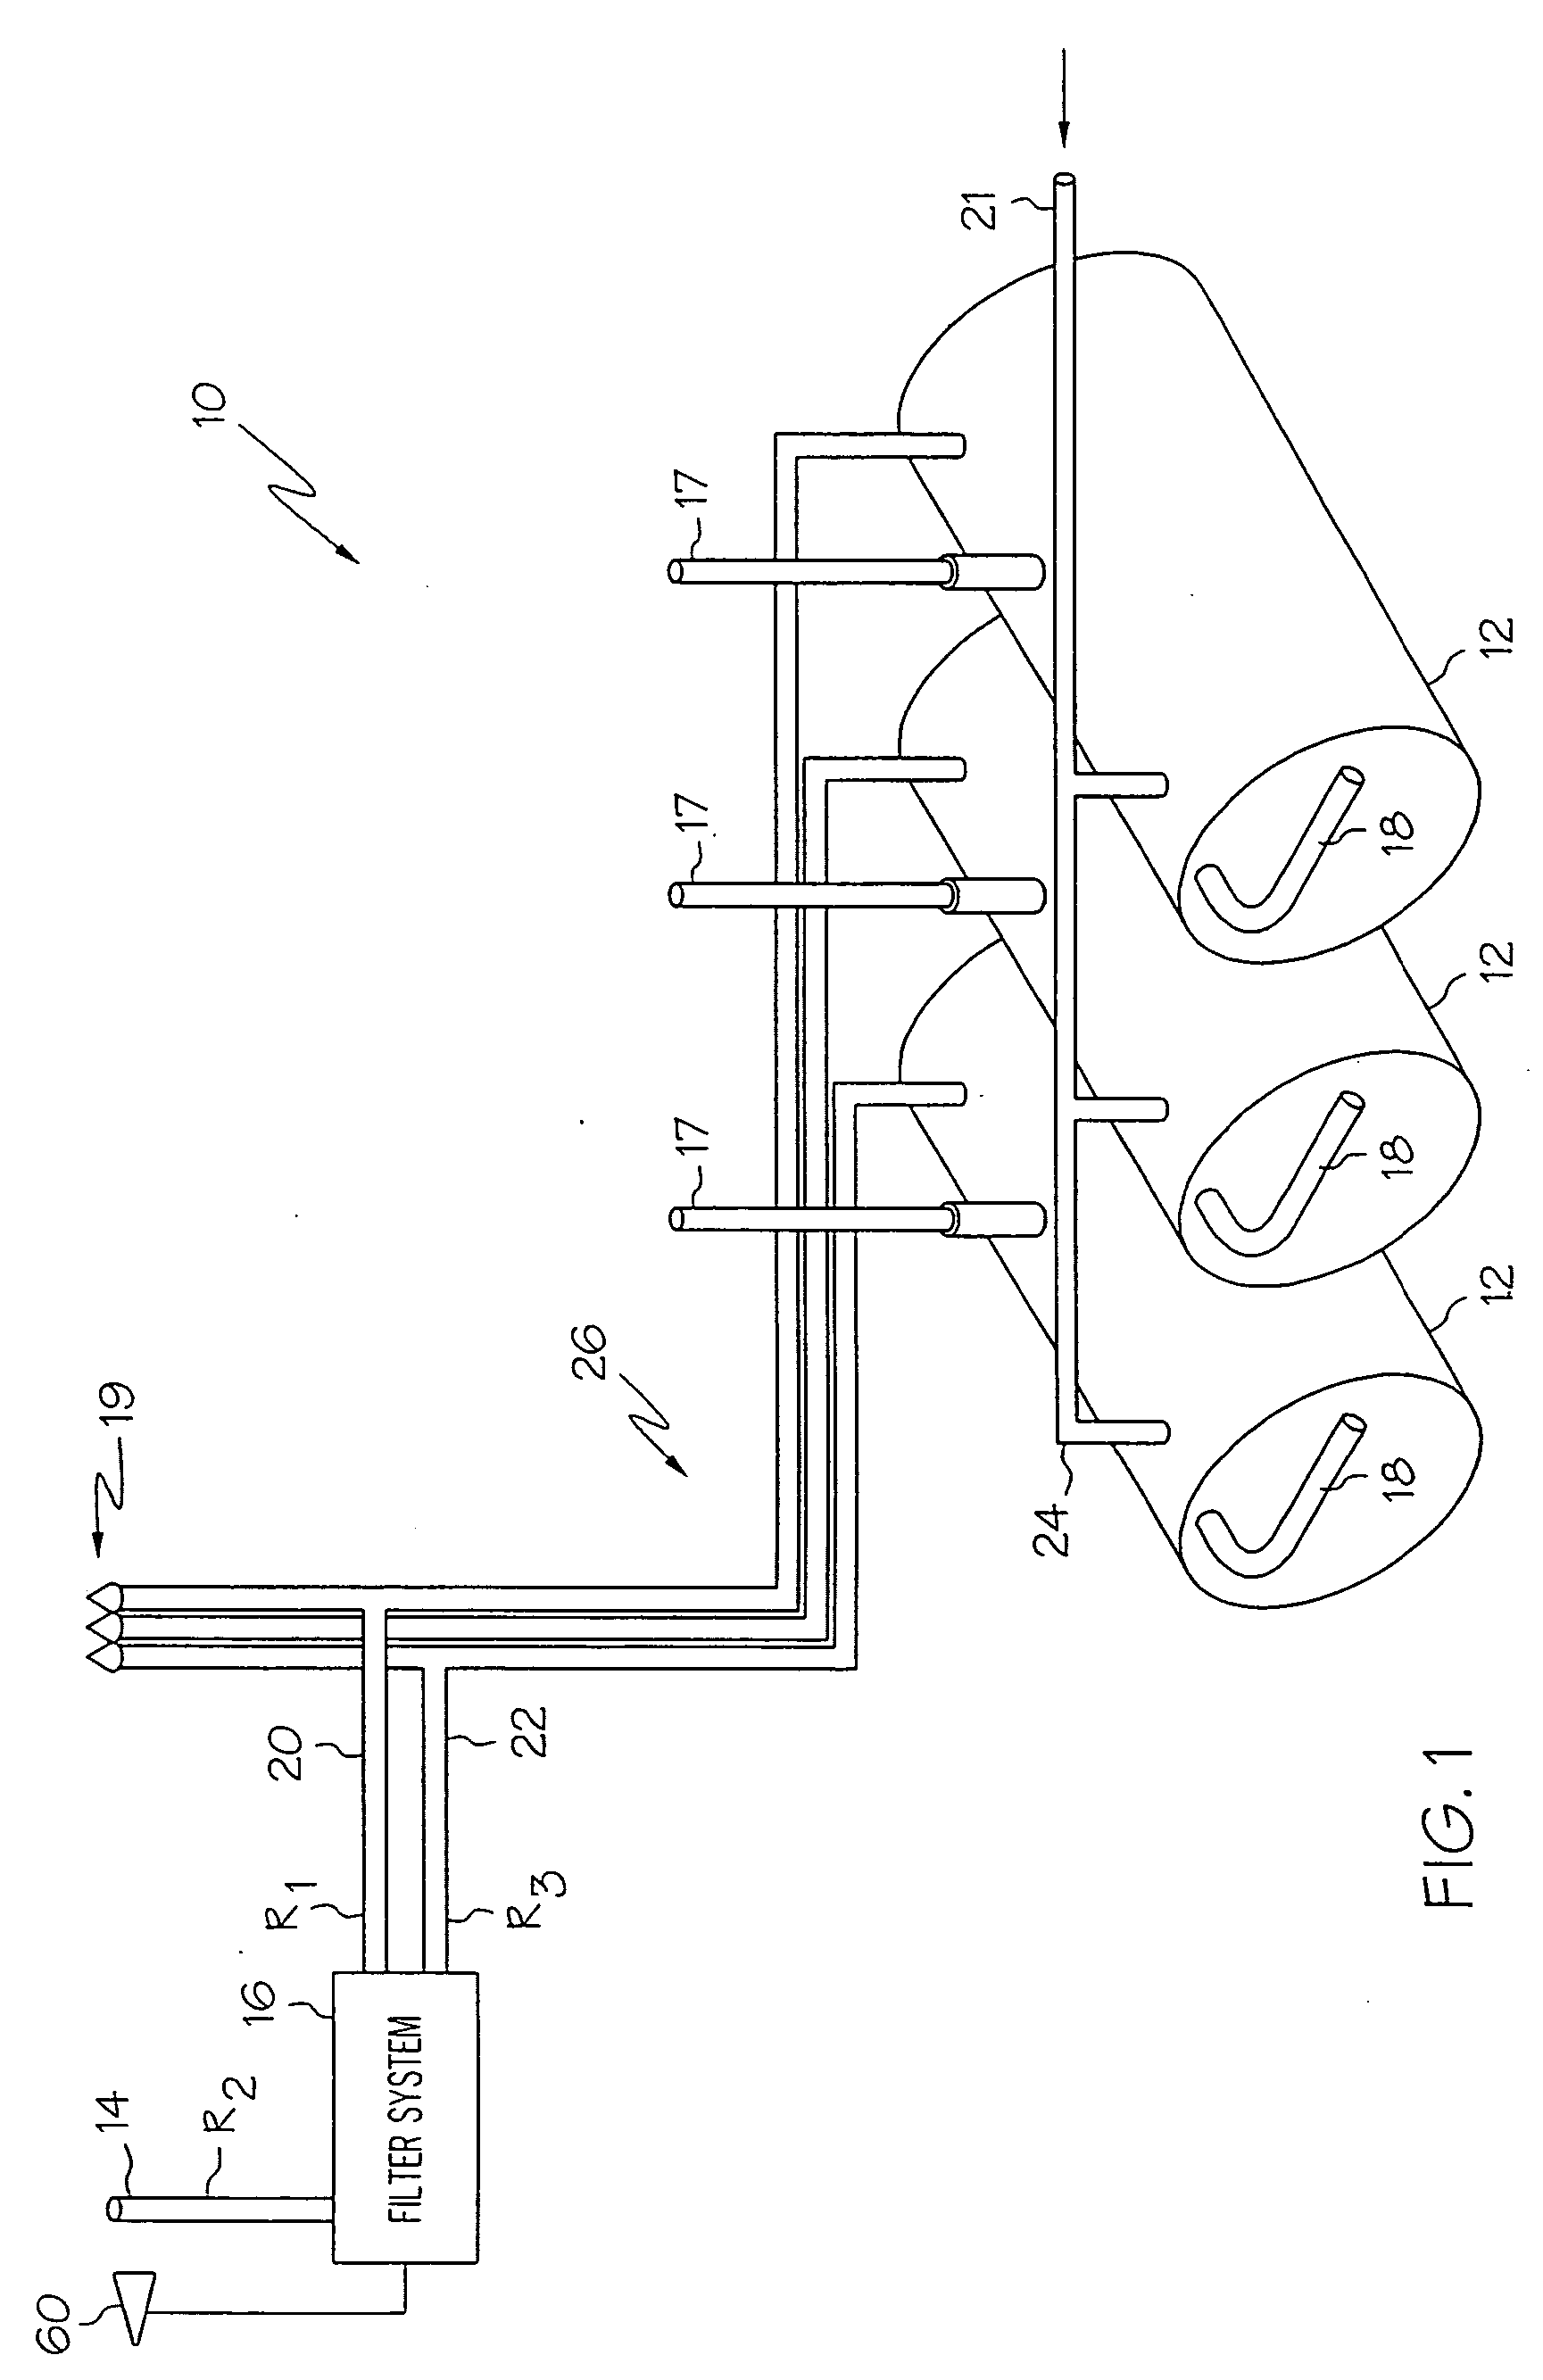 Fuel storage and dispensing system